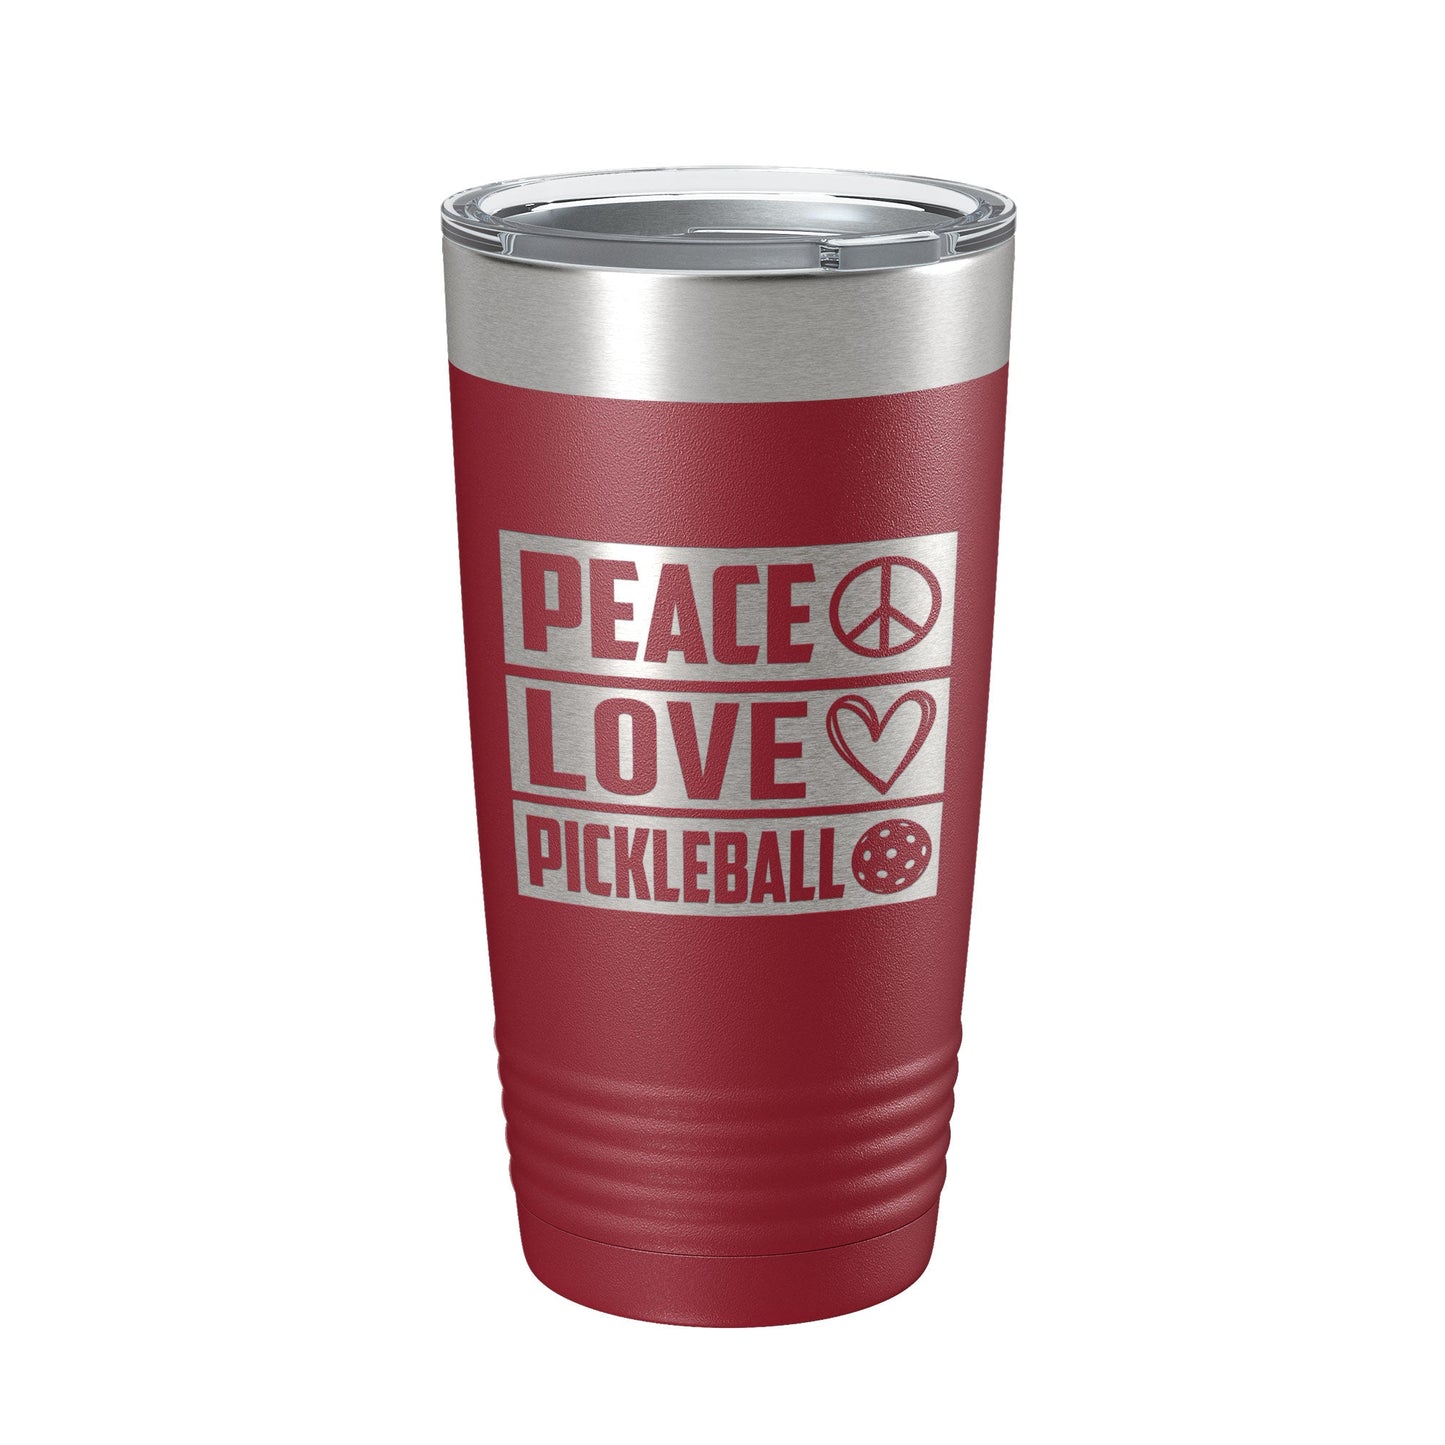 Peace Love Pickleball Tumbler Travel Mug Insulated Laser Engraved Coffee Cup Pickle Ball Gift 20 oz-18